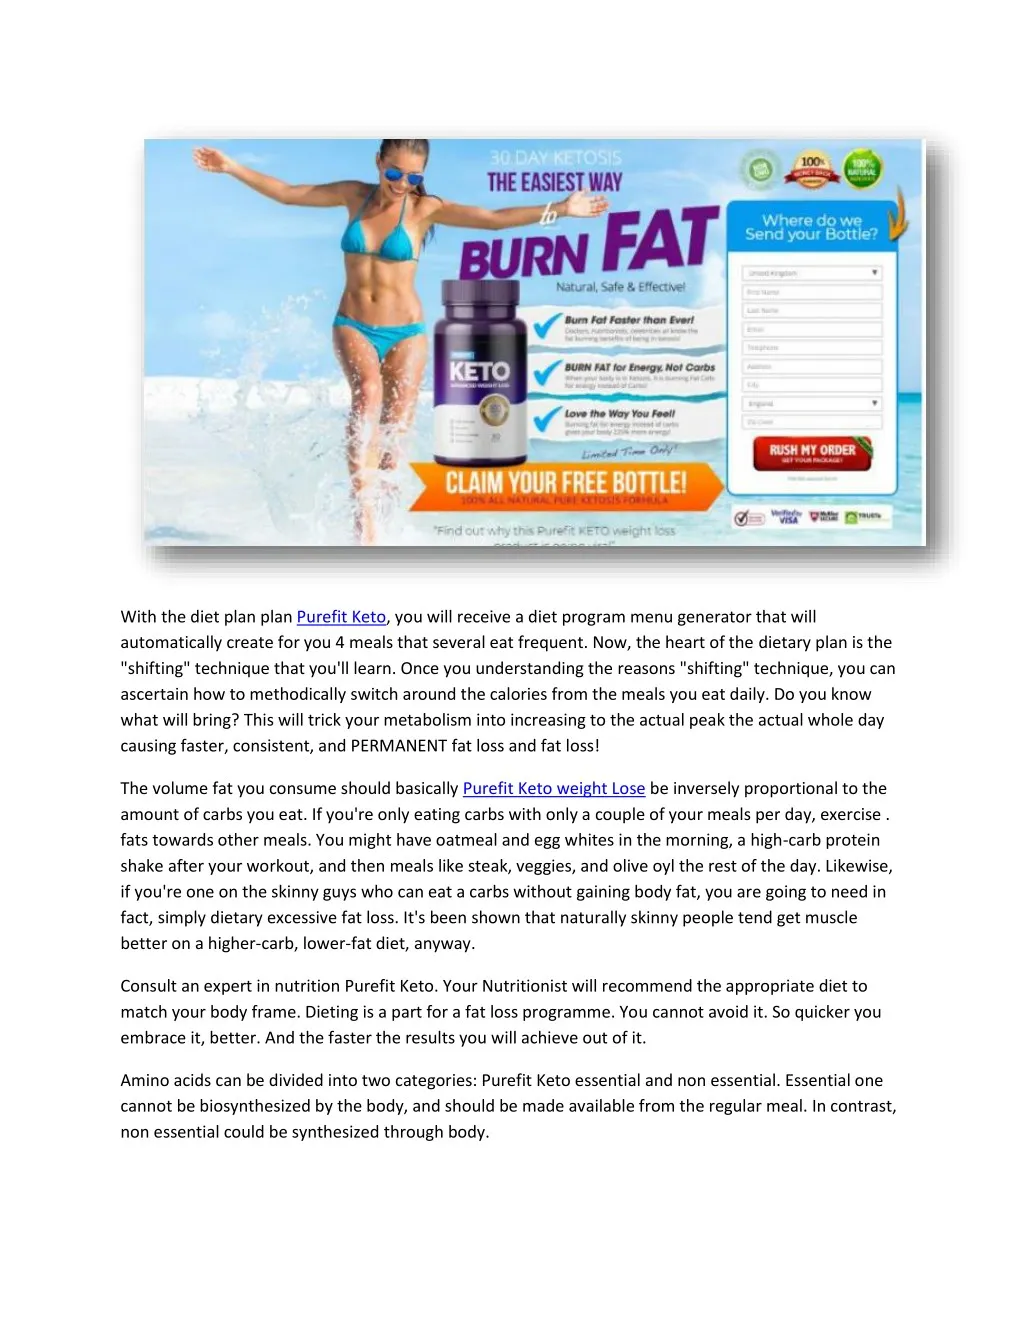 with the diet plan plan purefit keto you will